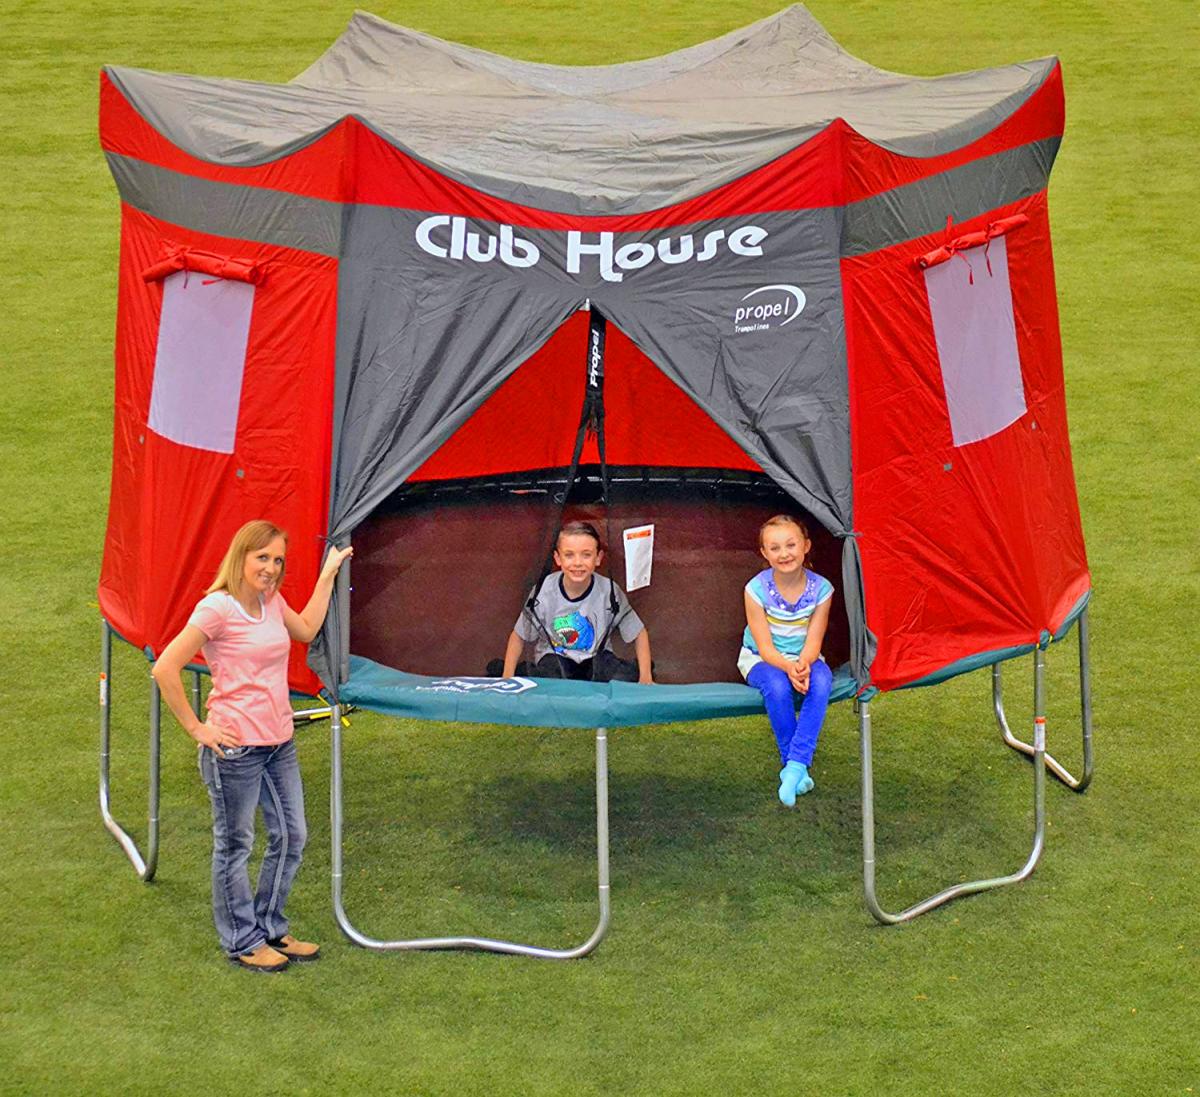 Clubhouse Trampoline Cover Tent - Propel Giant trampoline tent cover kids fort